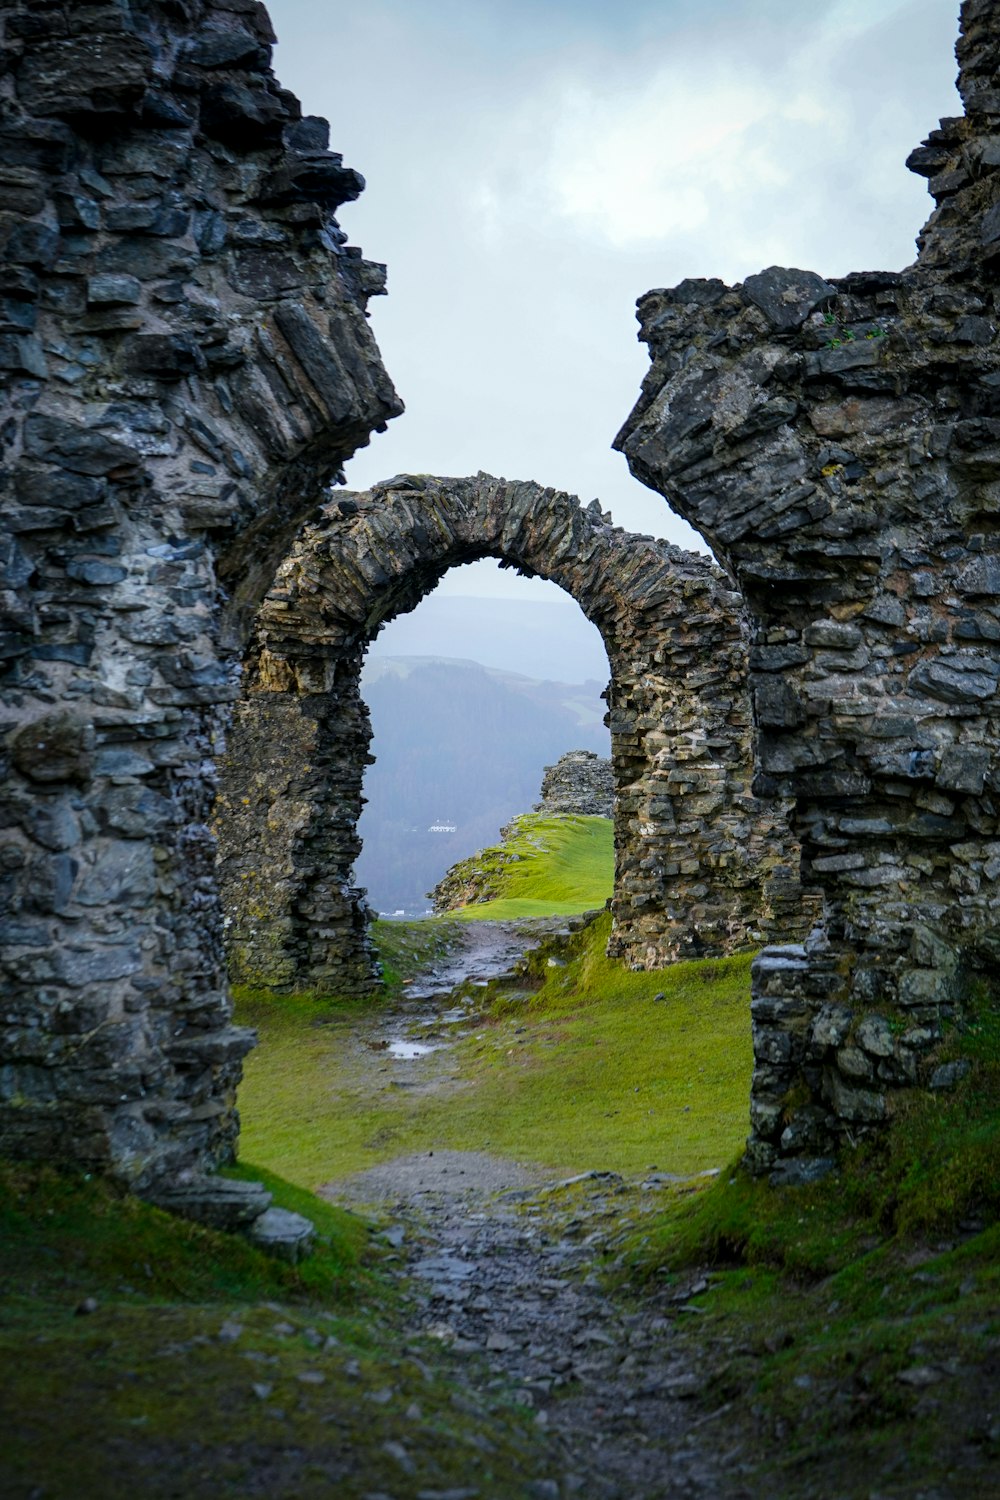 a stone archway leading to a grassy area